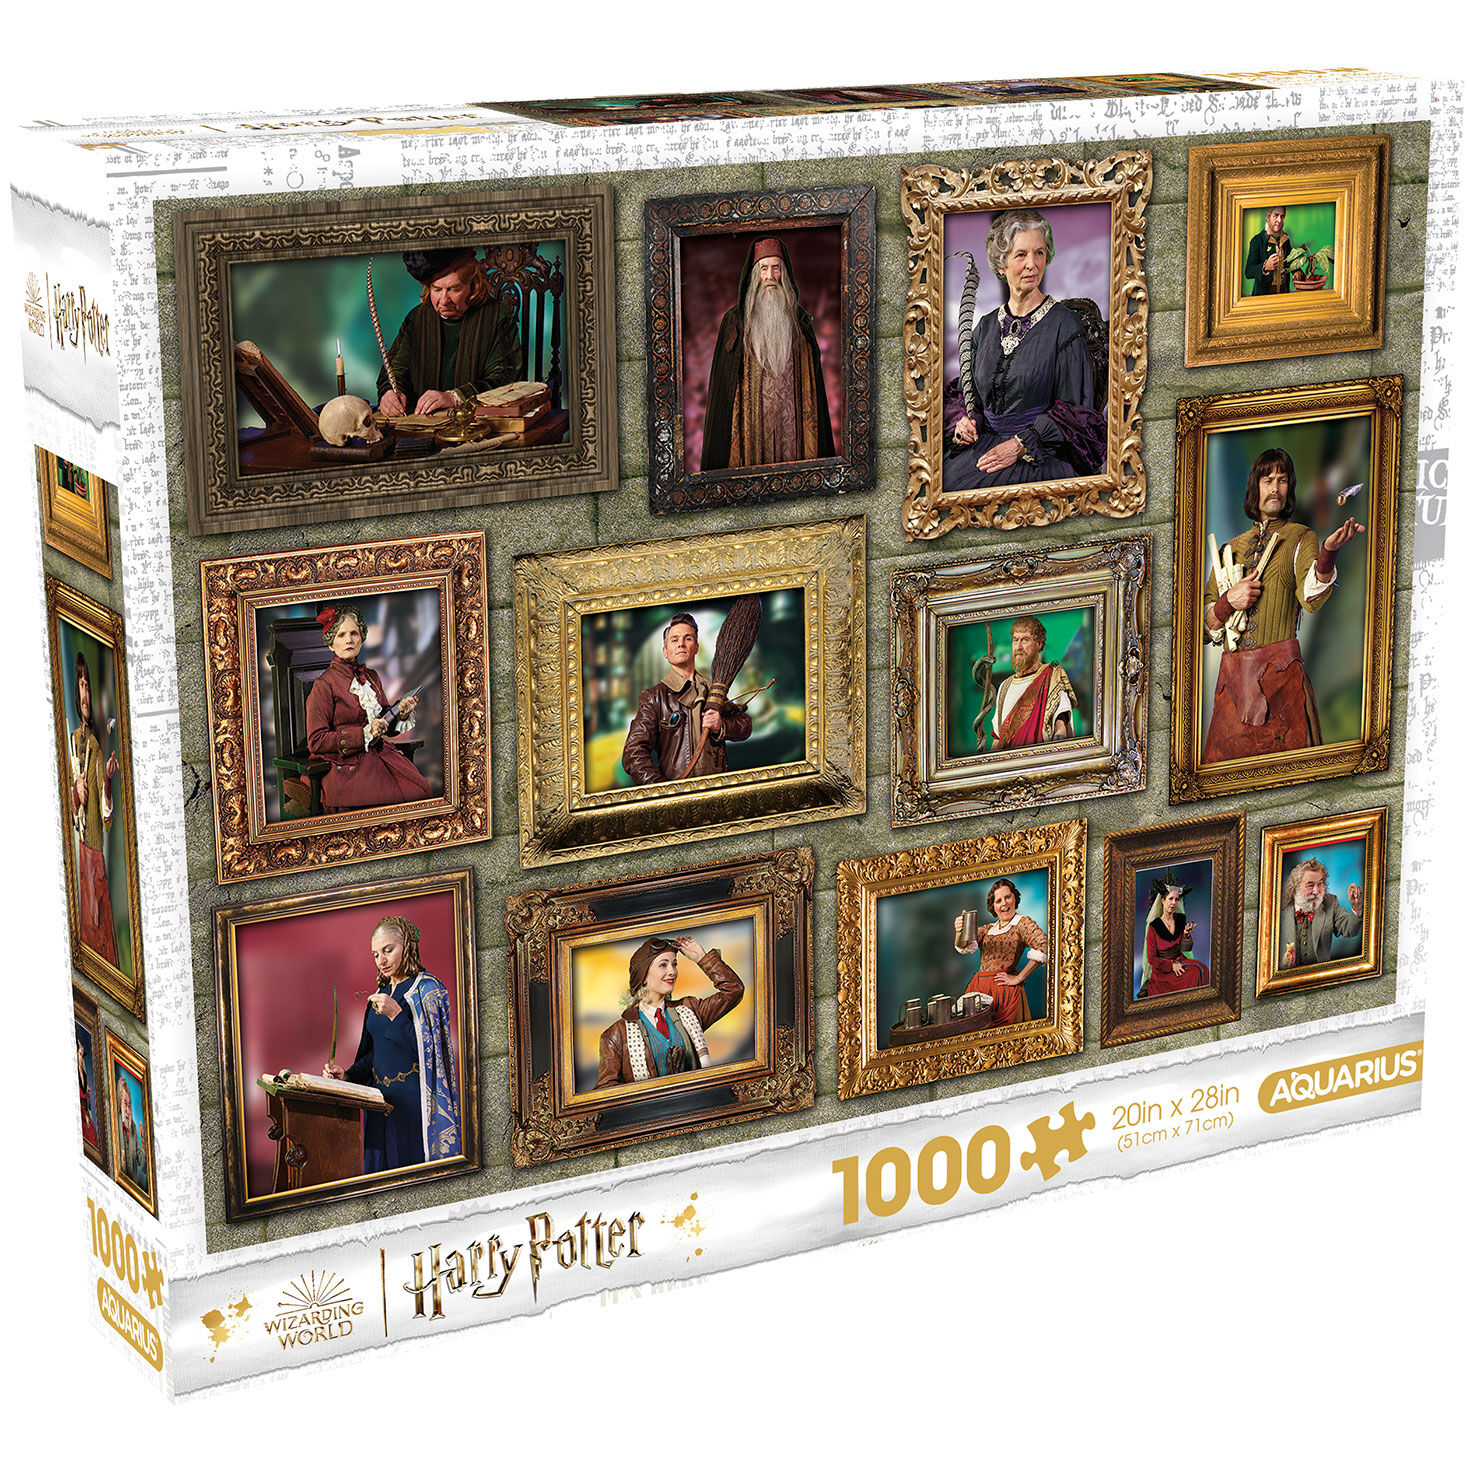 Aquarius Harry Potter Witches & Wizards 1,000-Piece Jigsaw Puzzle for only USD 19.99 | Hallmark